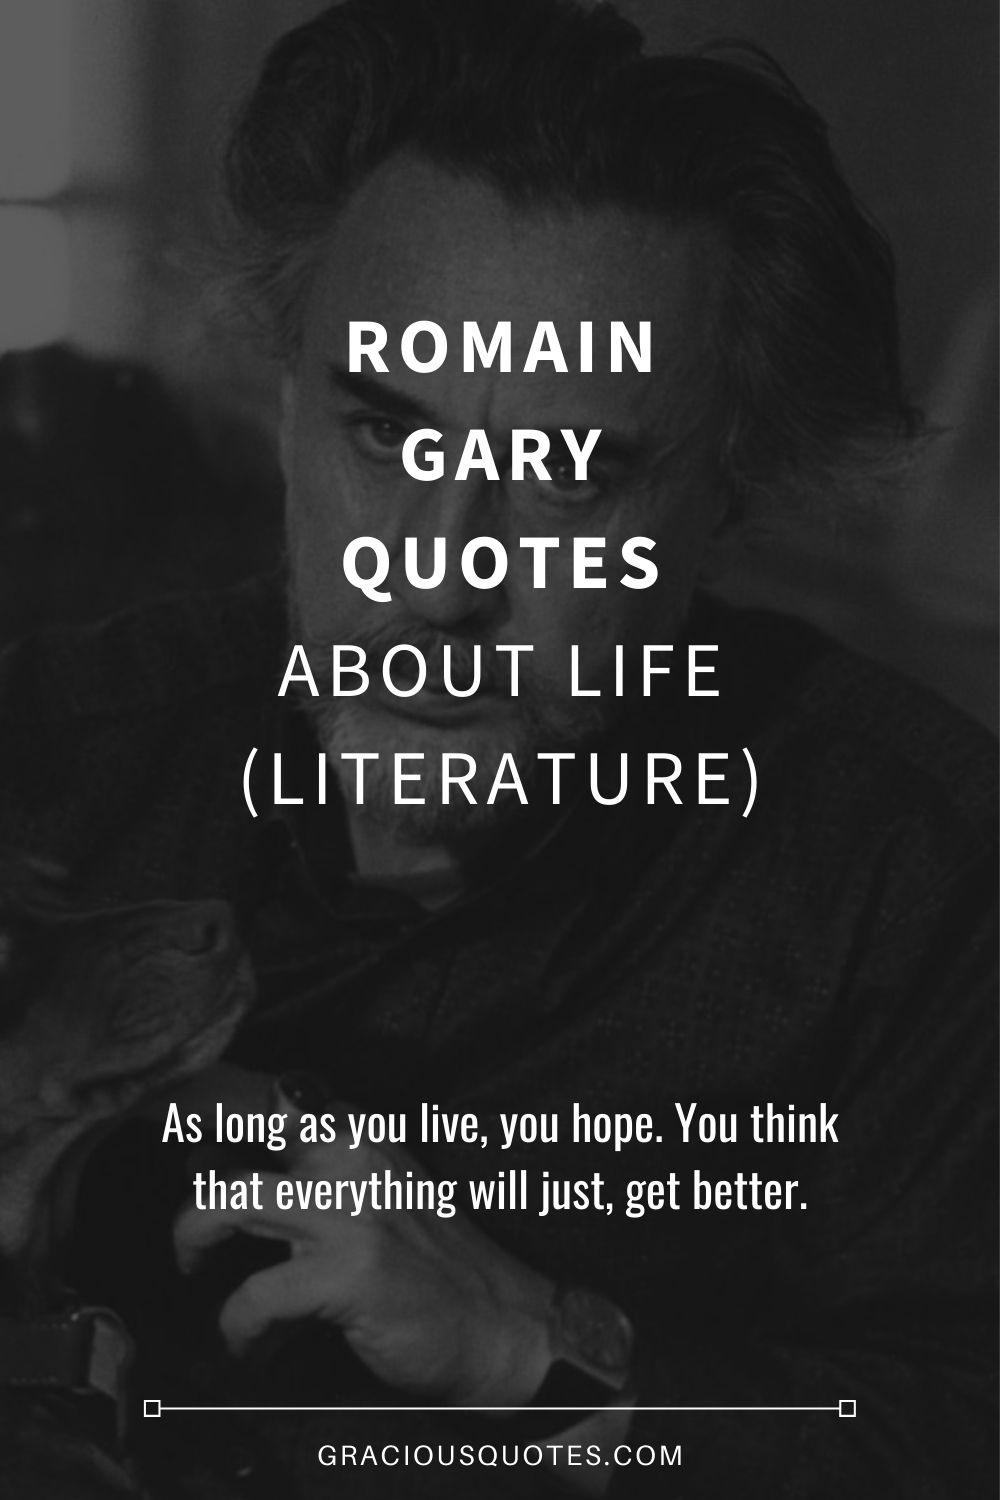 Romain Gary Quotes About Life (LITERATURE) - Gracious Quotes